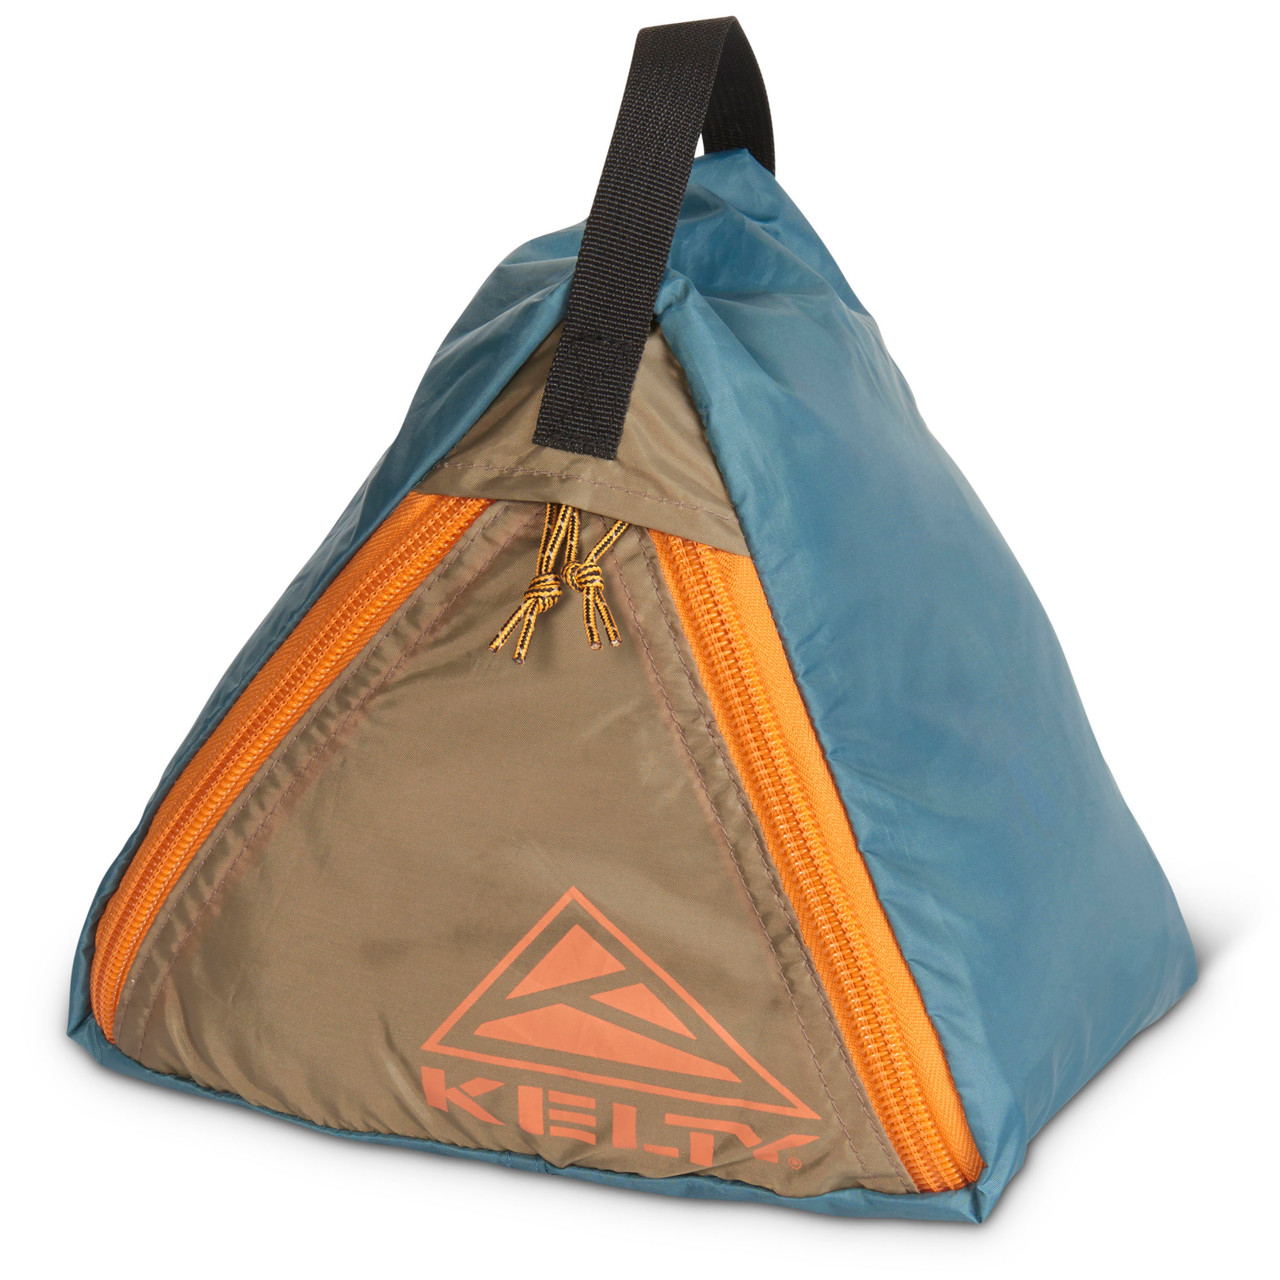 Spare Tent Bag with Shoulder Straps 4m - Breathe Bell Tents